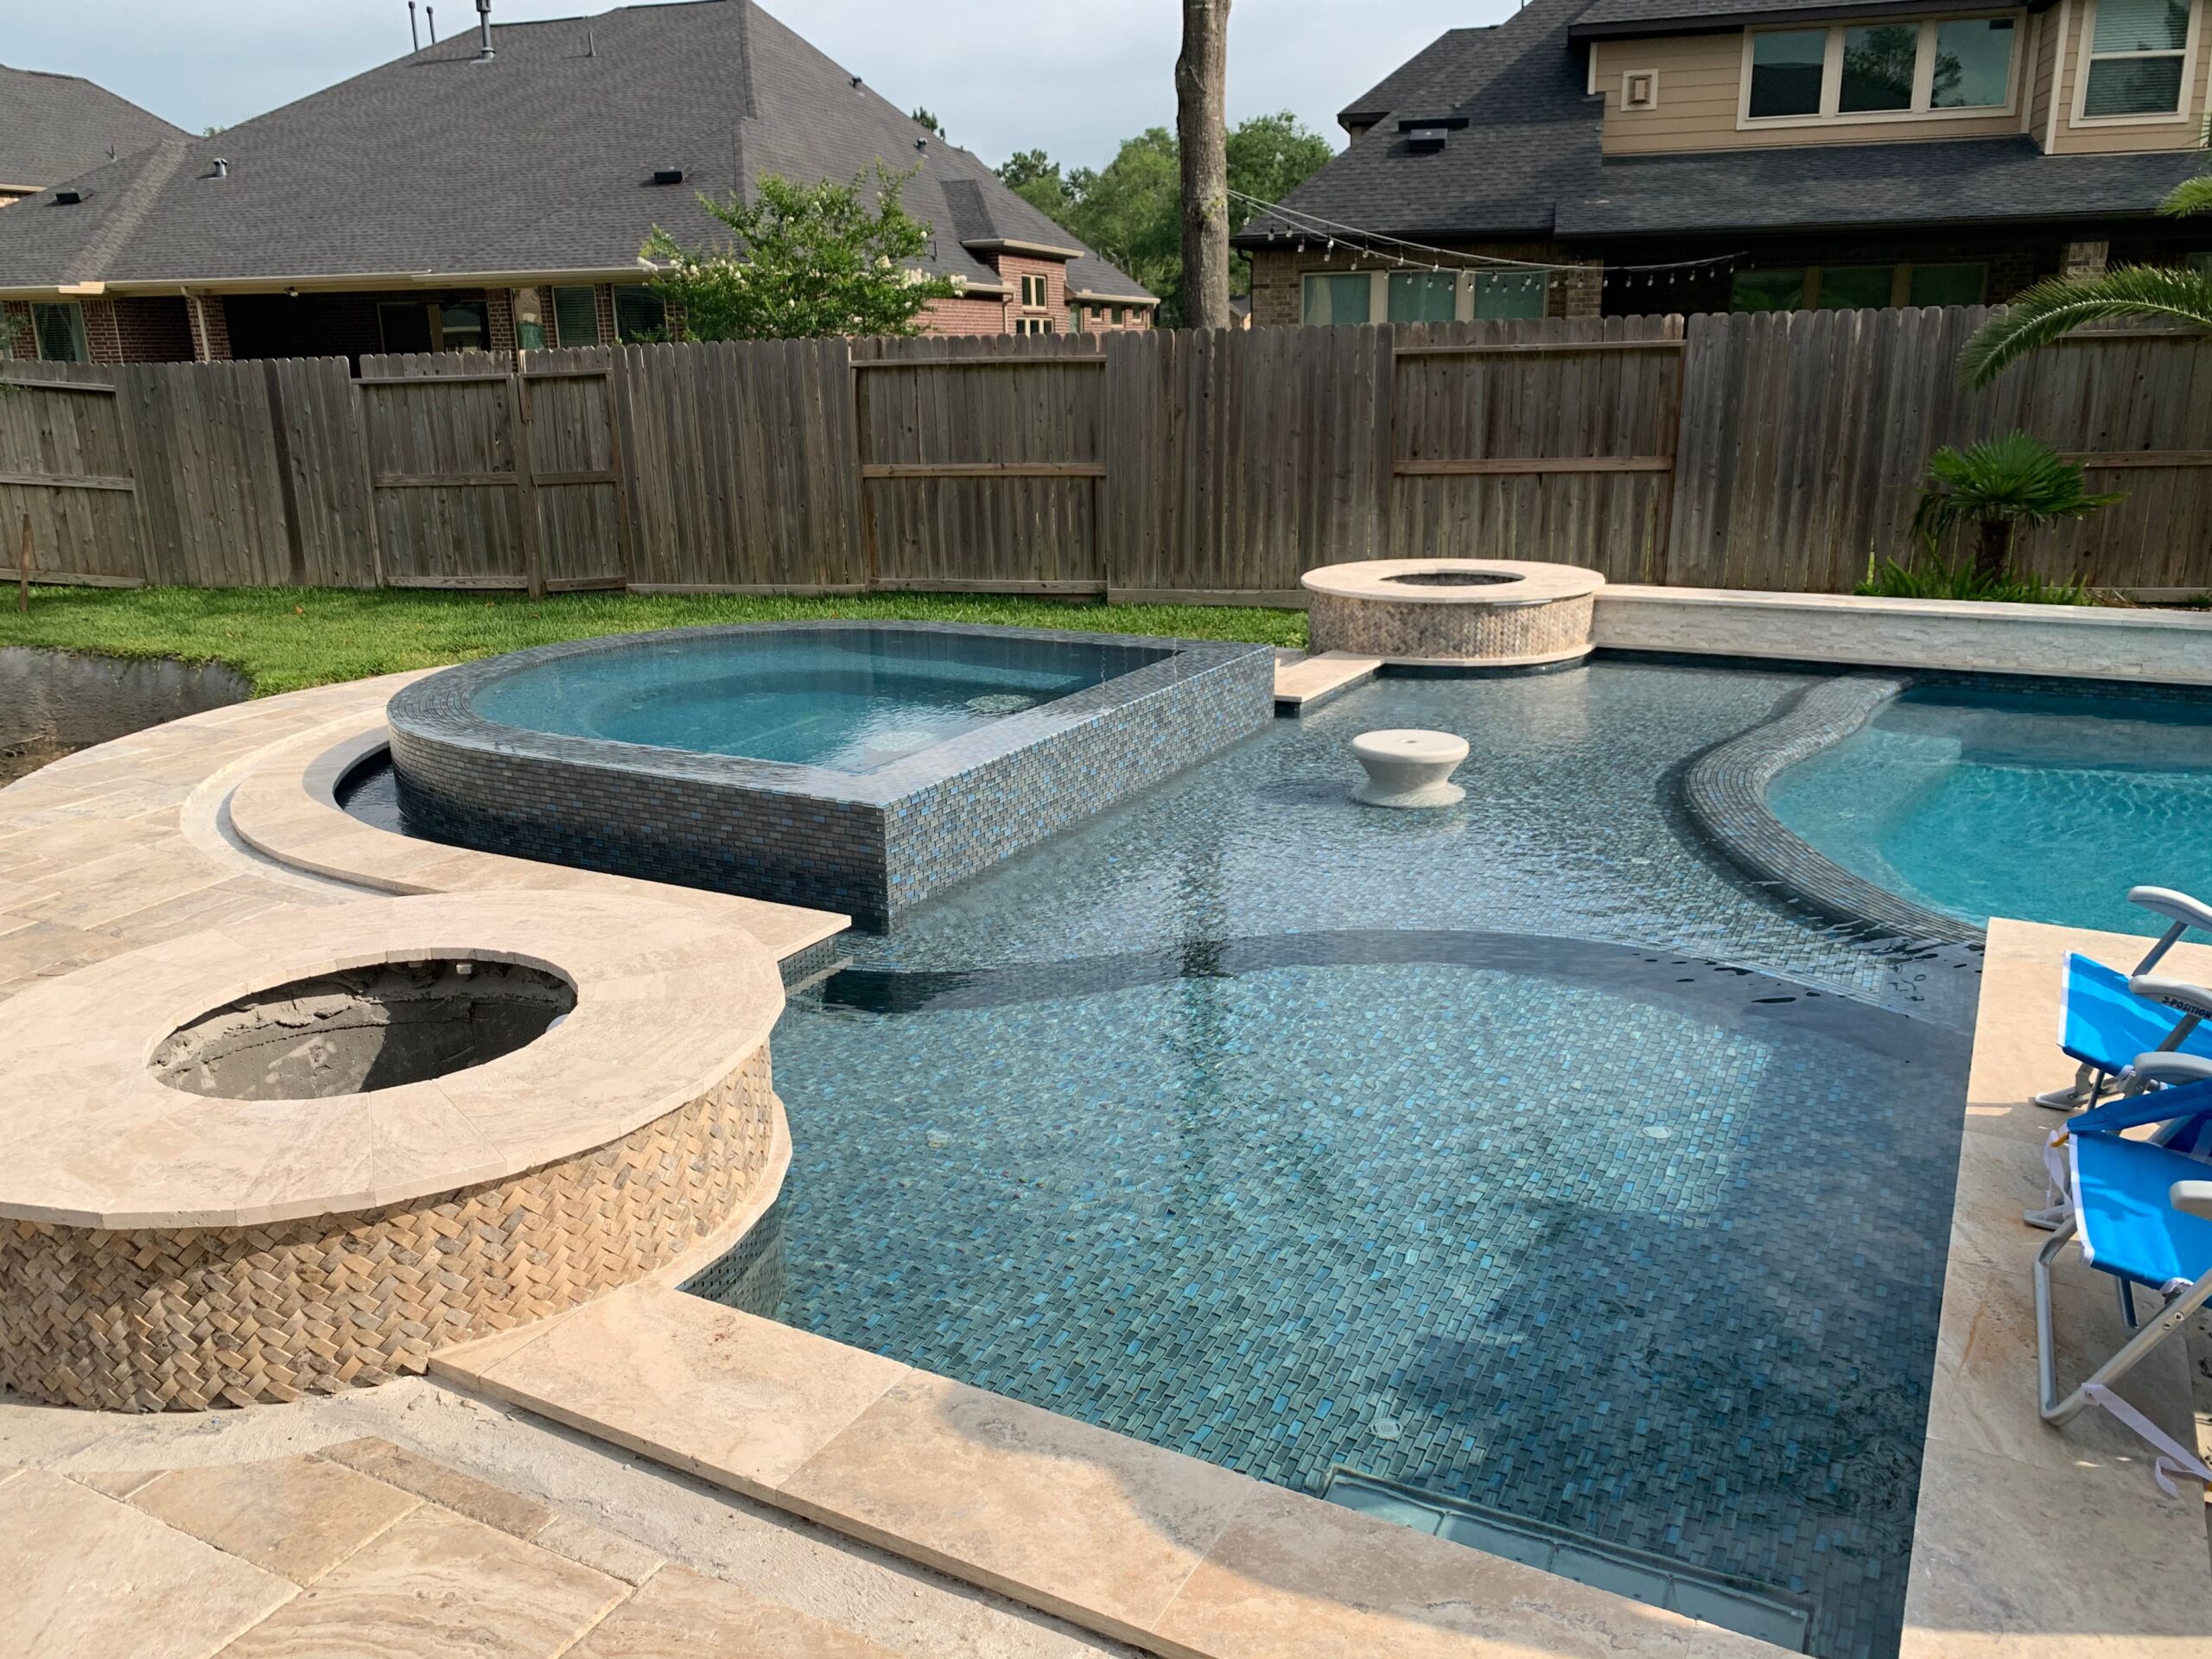 Get Your Pool Ready For Summer With A Pool Remodel